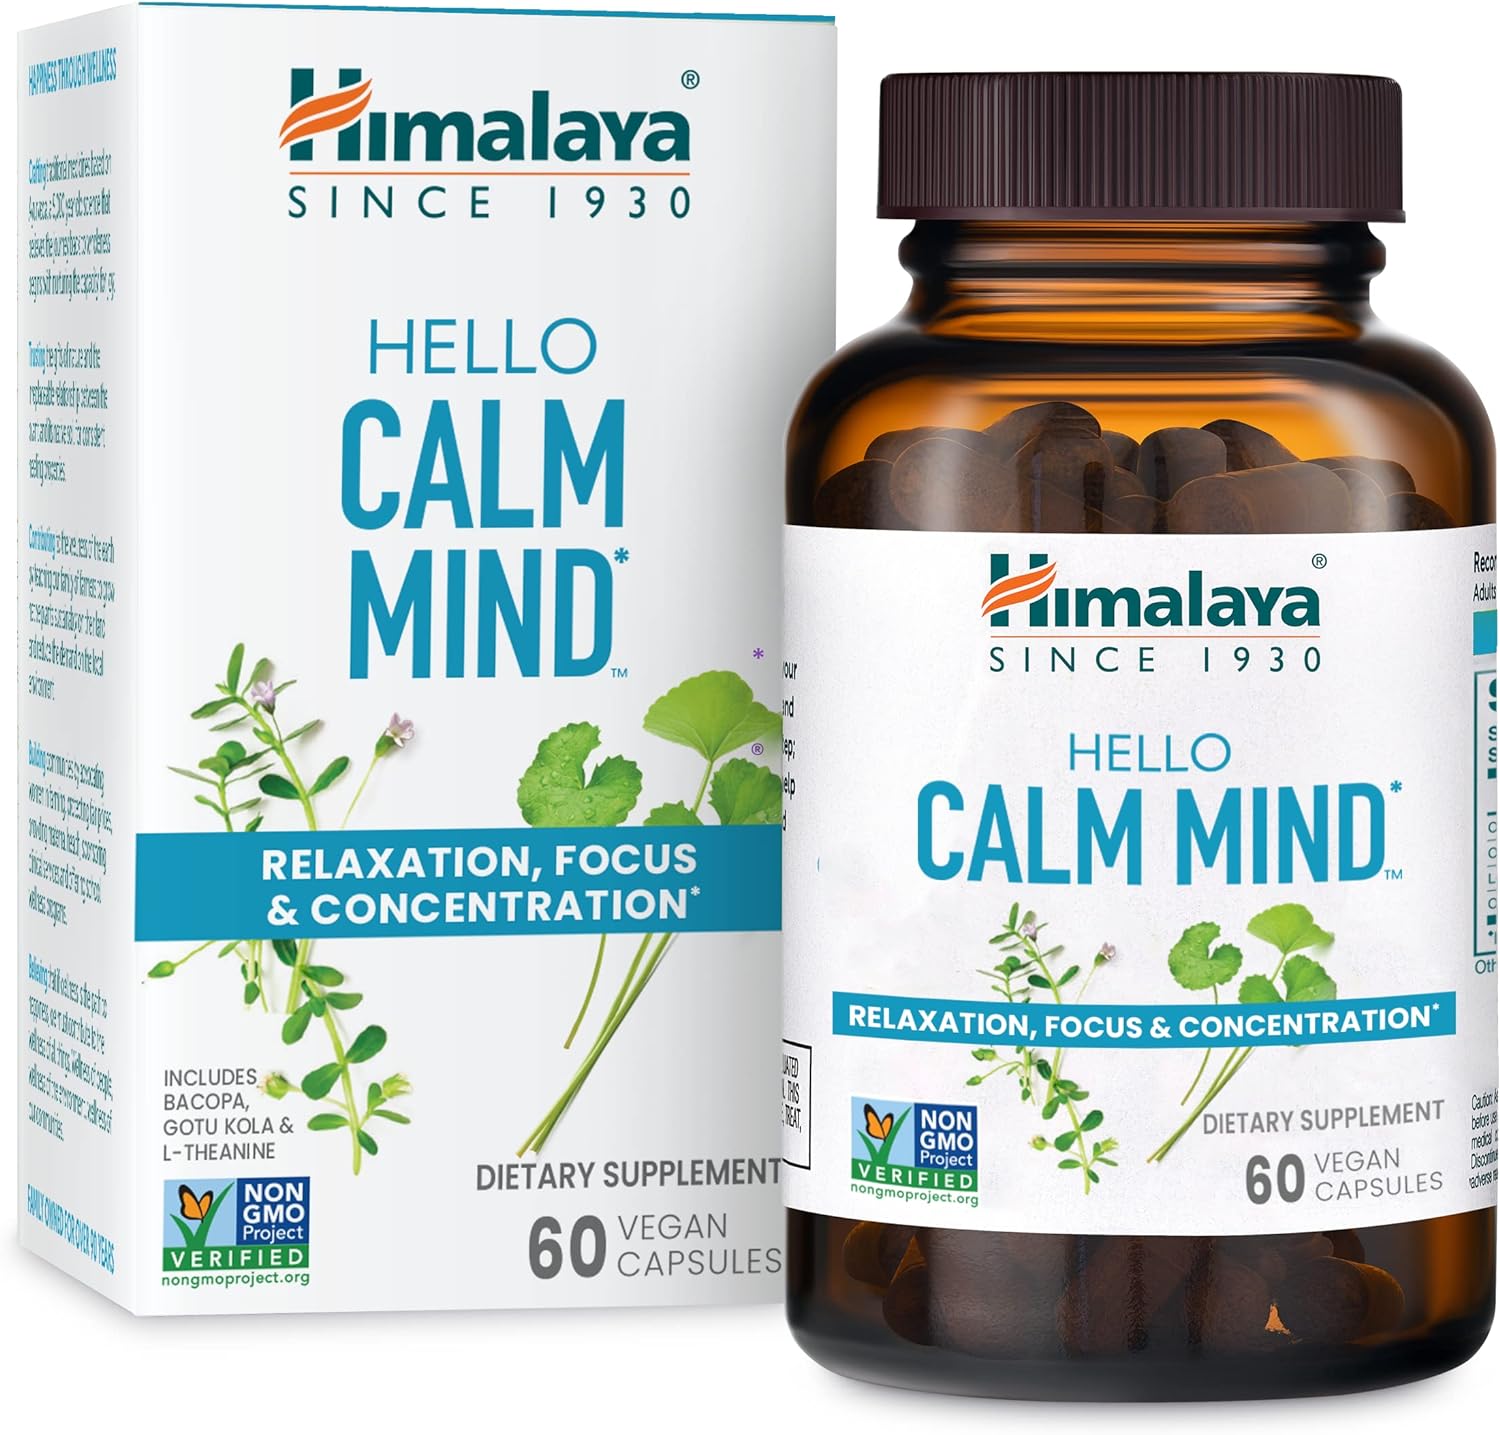 Himalaya Hello Calm Mind Herbal Supplement, with Bacopa, L-Theanine, G